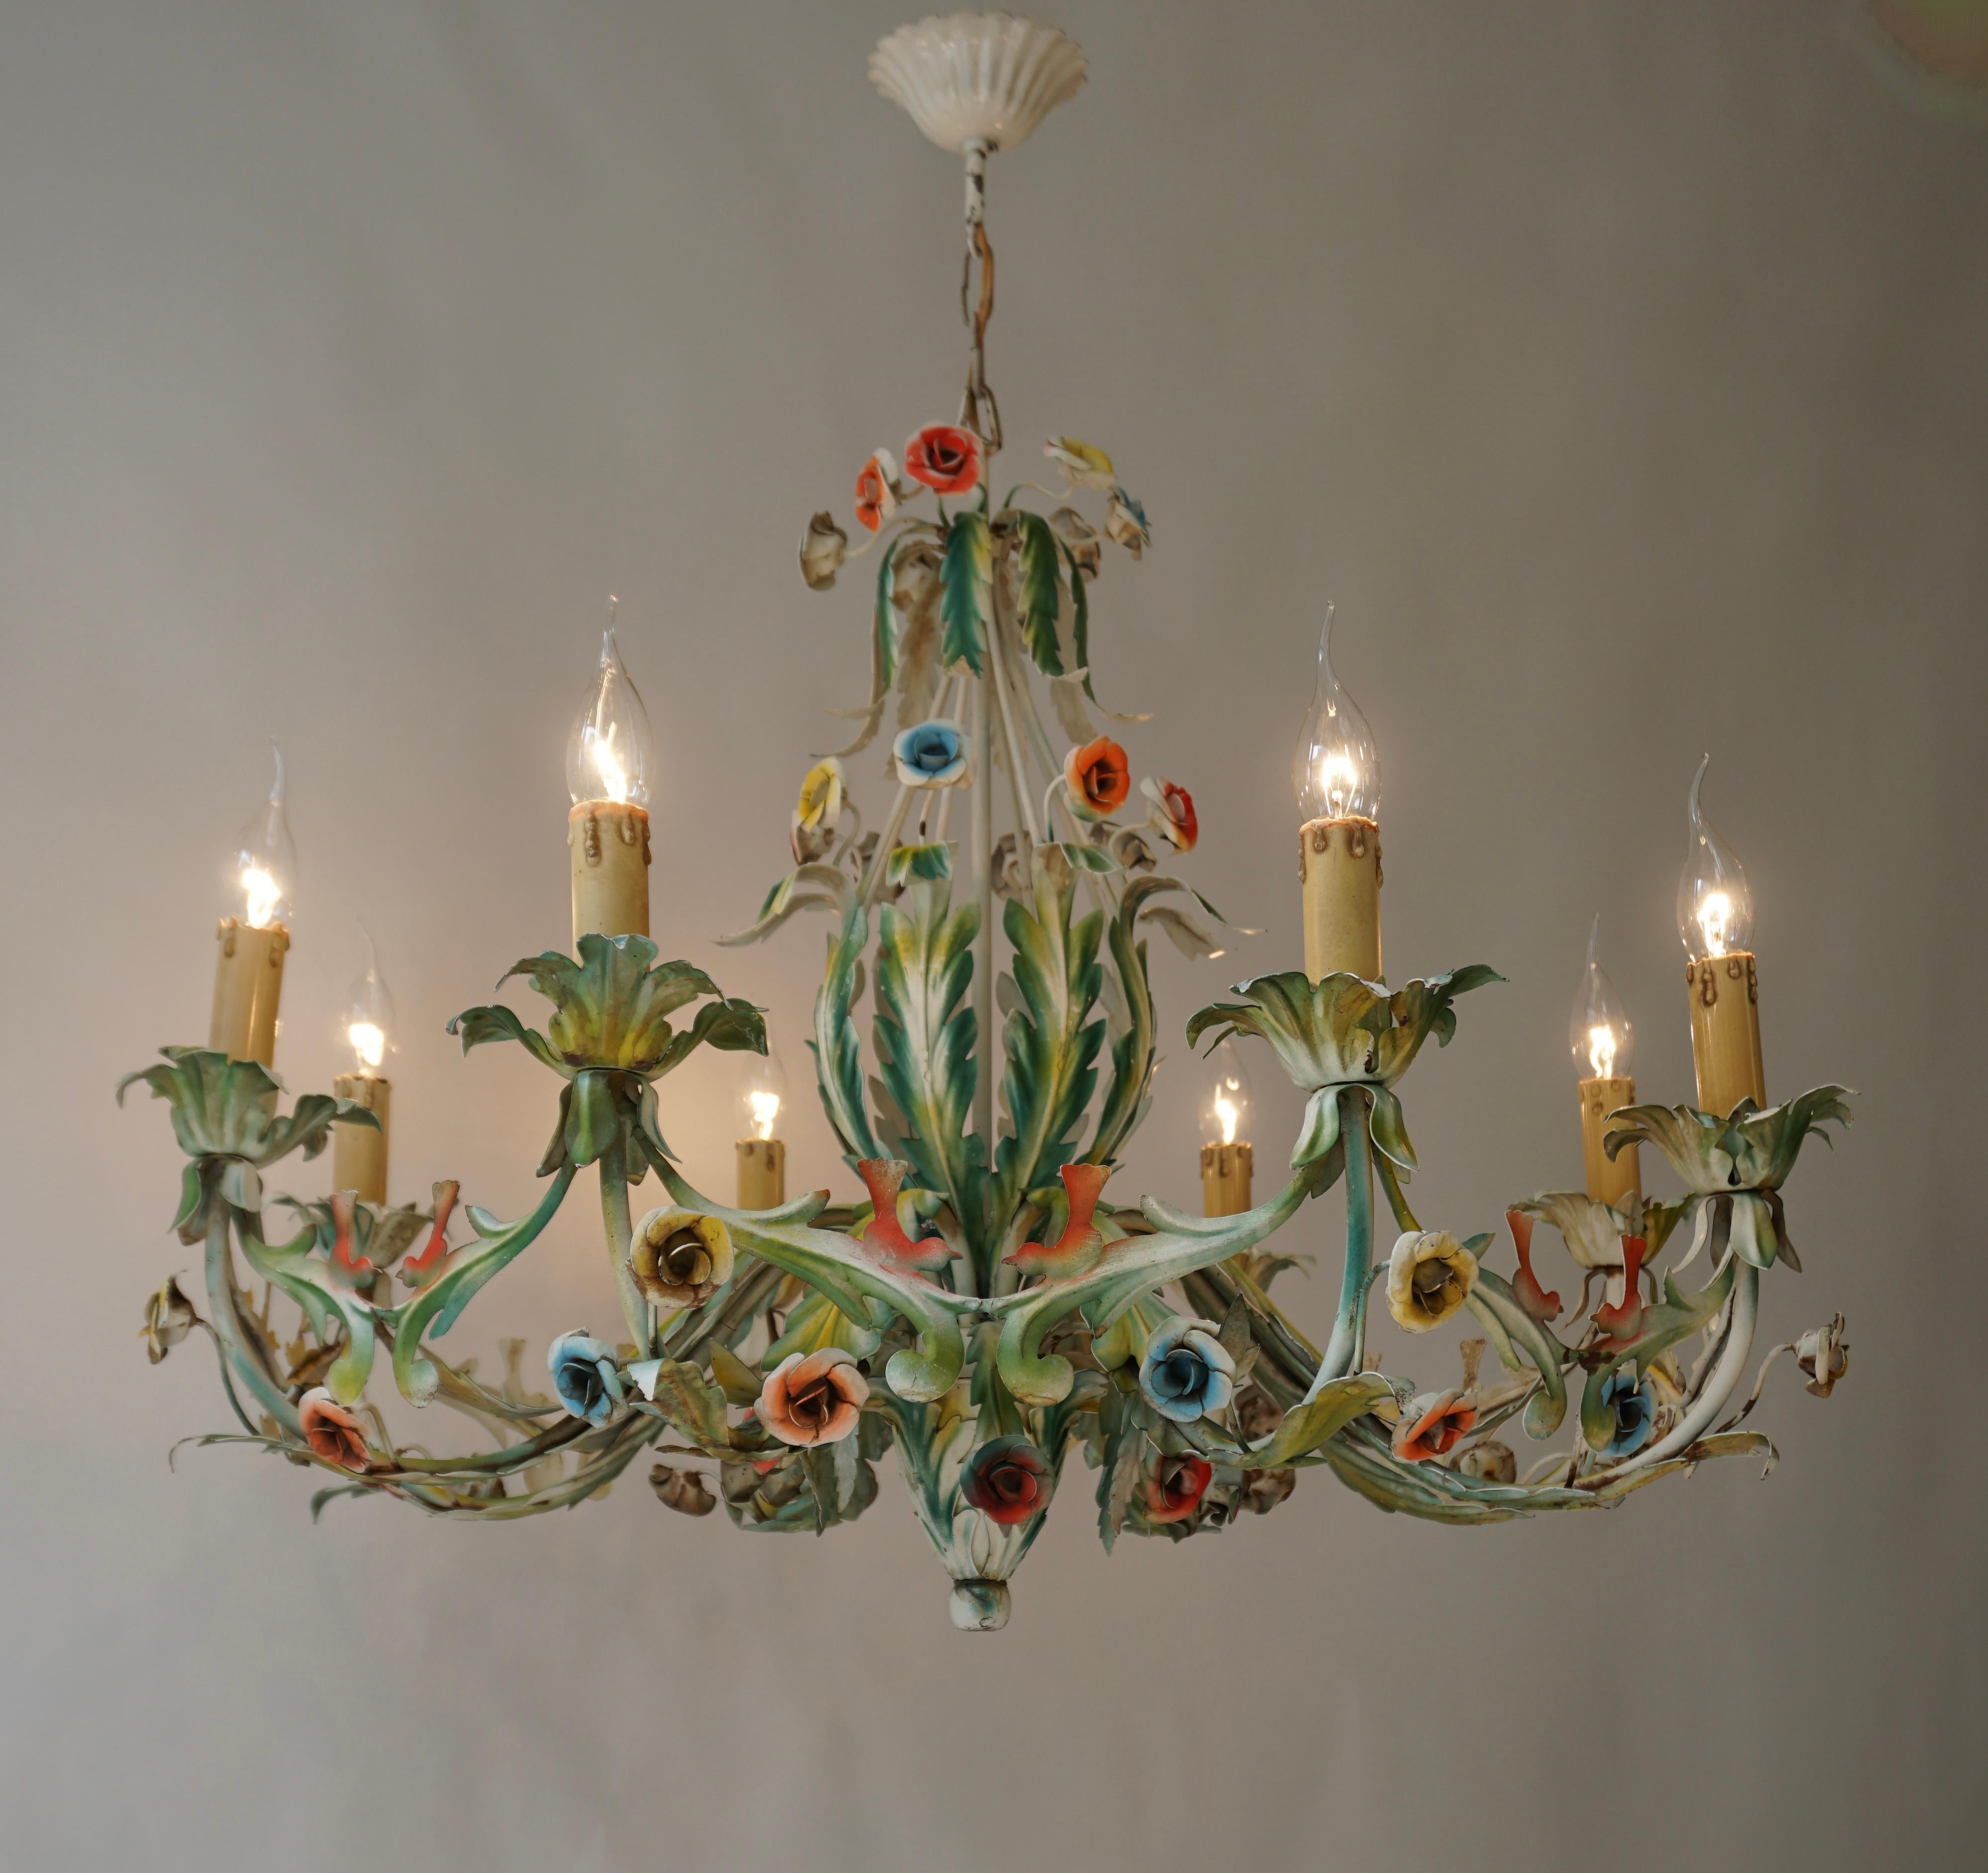 20th Century Large Polychrome Painted Metal Chandelier with Flowers and Birds For Sale